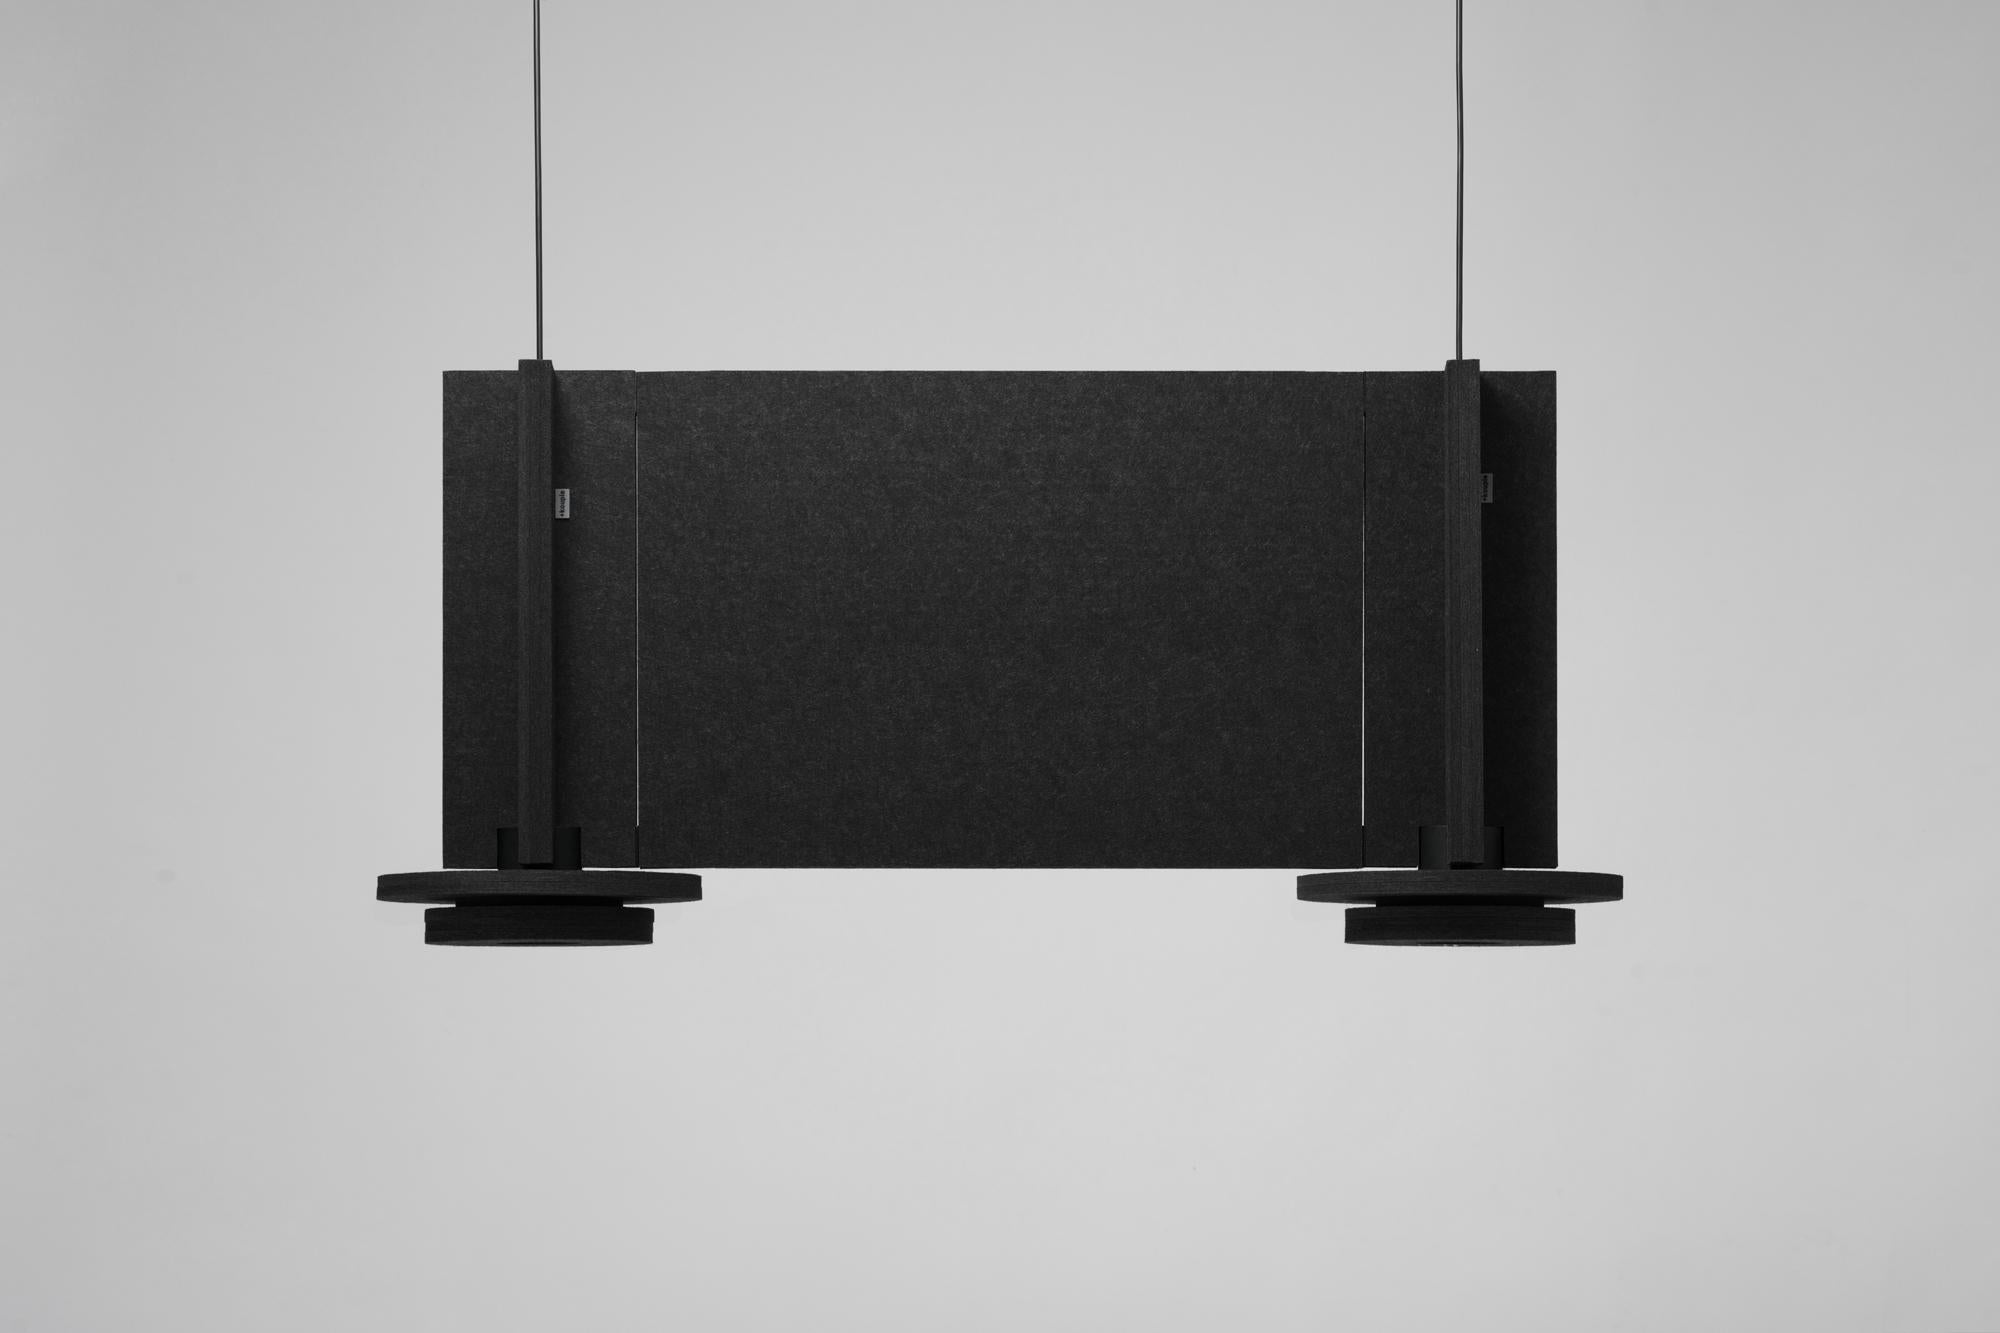 Jeffrey Panel Black Pendant Lamp by +kouple
Dimensions: W 60 x H 41,5 cm.
Materials: Recycled polyester (PET felt) and powder-coated steel.

All our lamps can be wired according to each country. If sold to the USA it will be wired for the USA for